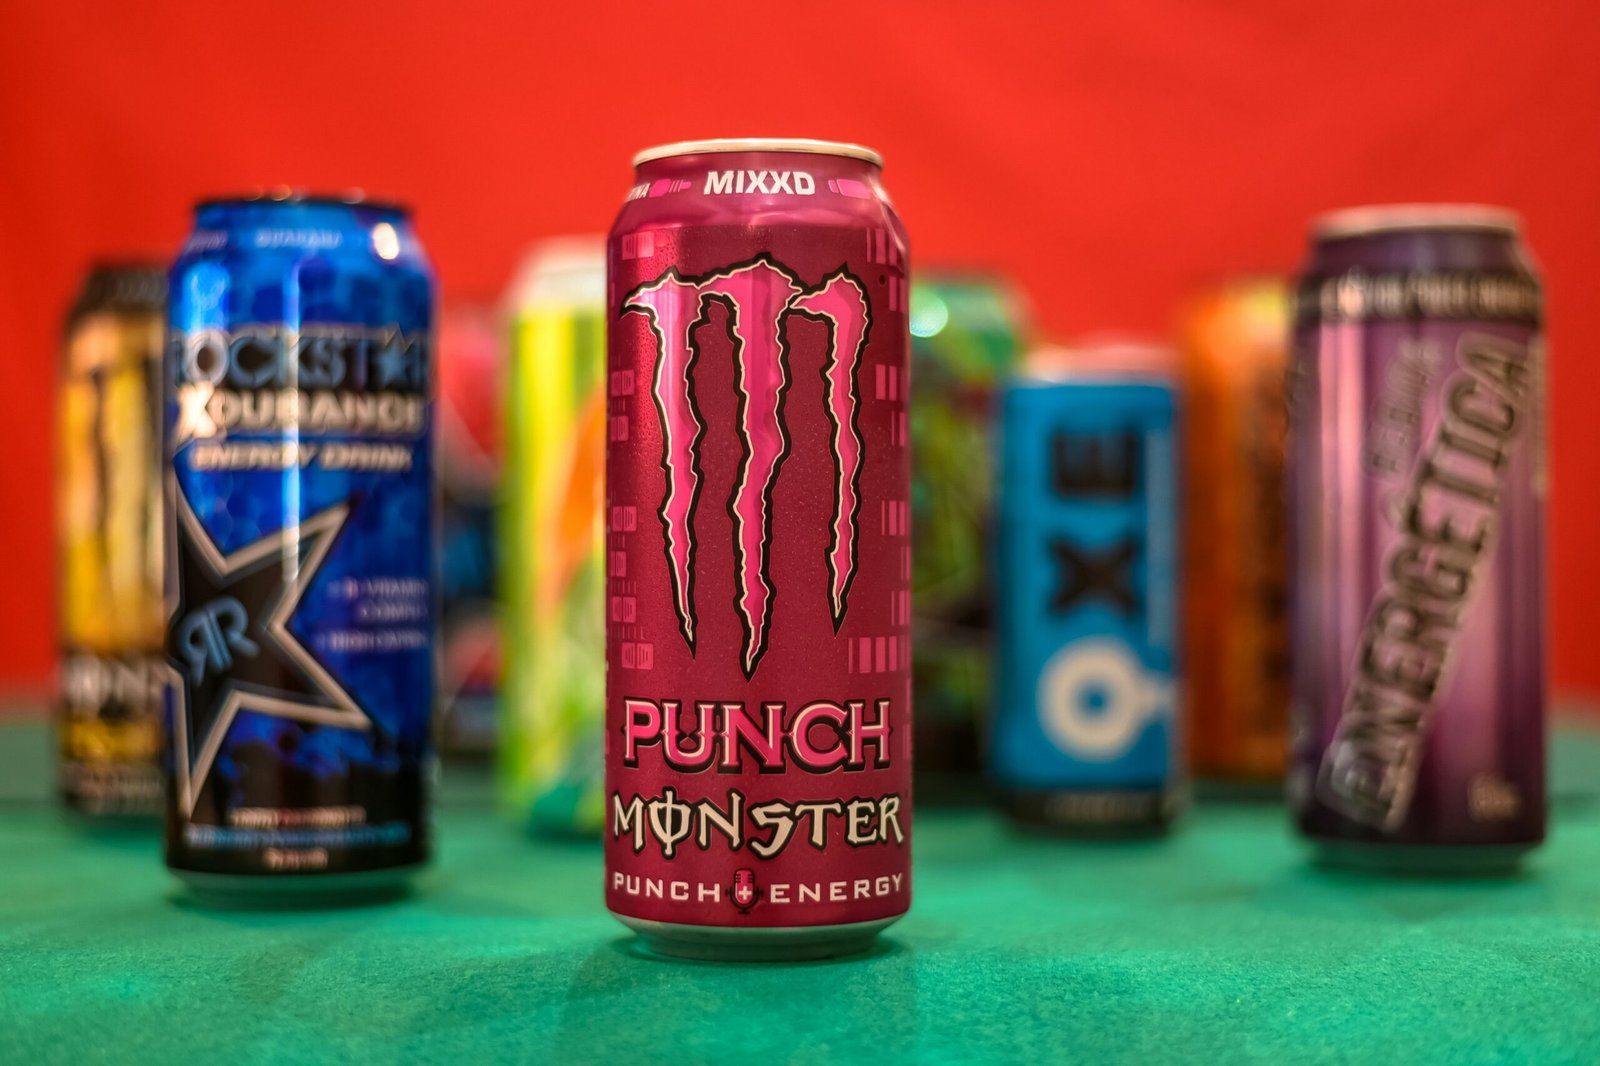 Discover the best energy drinks in the UK that suits your taste and energy requirements. Explore brands like Red Bull, Rockstar, Boost etc